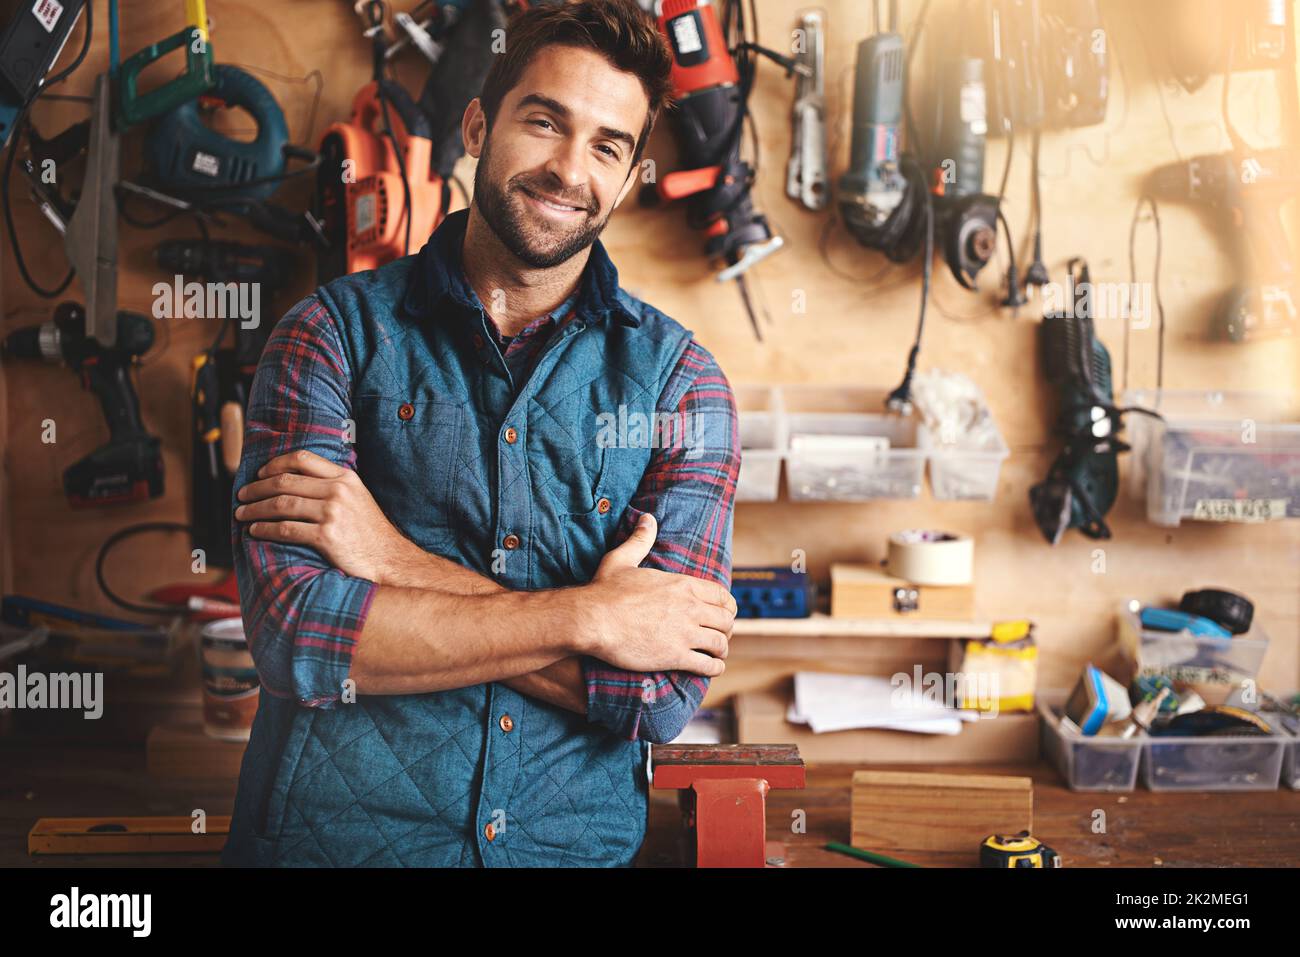 All the toys a man could ask for. Portrait of a man standing in his workshop. Stock Photo